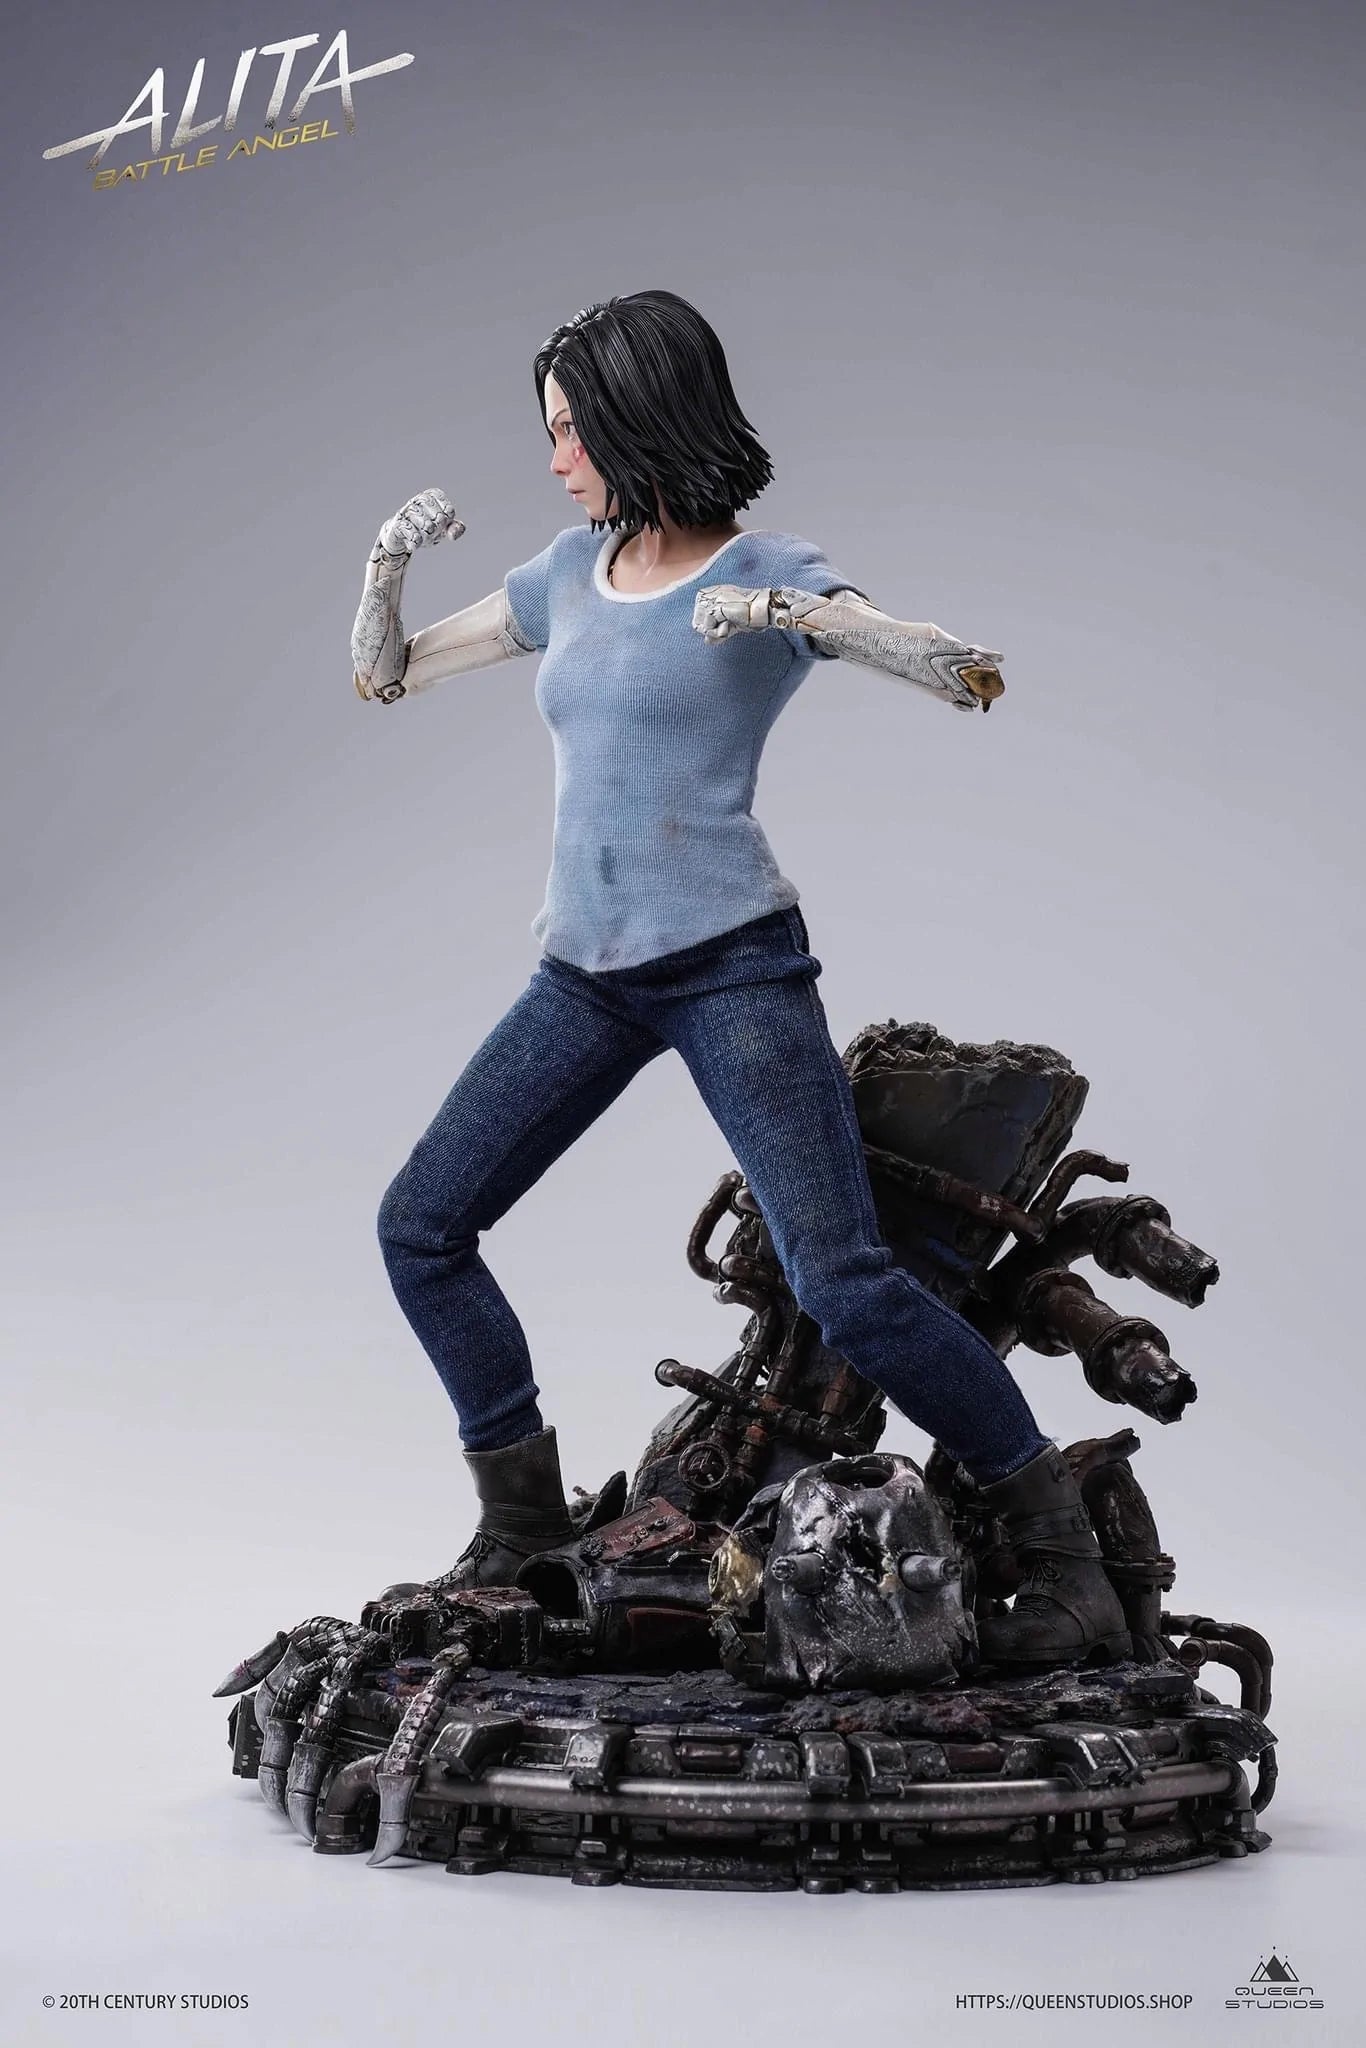  This Queen Studios’ 1/4 scale Alita statue: Battle Angel Stands at 47cm tall. A near perfect scaled down replica of the 1/1 Life-Size statue. Like the life-size statue, her porcelain “doll” body is intricately designed, capturing the unique patterns and clockwork. Her likeness has been recreated with stunning accuracy, and the unique movie inspired base is packed full of detail making this the ultimate collector piece.